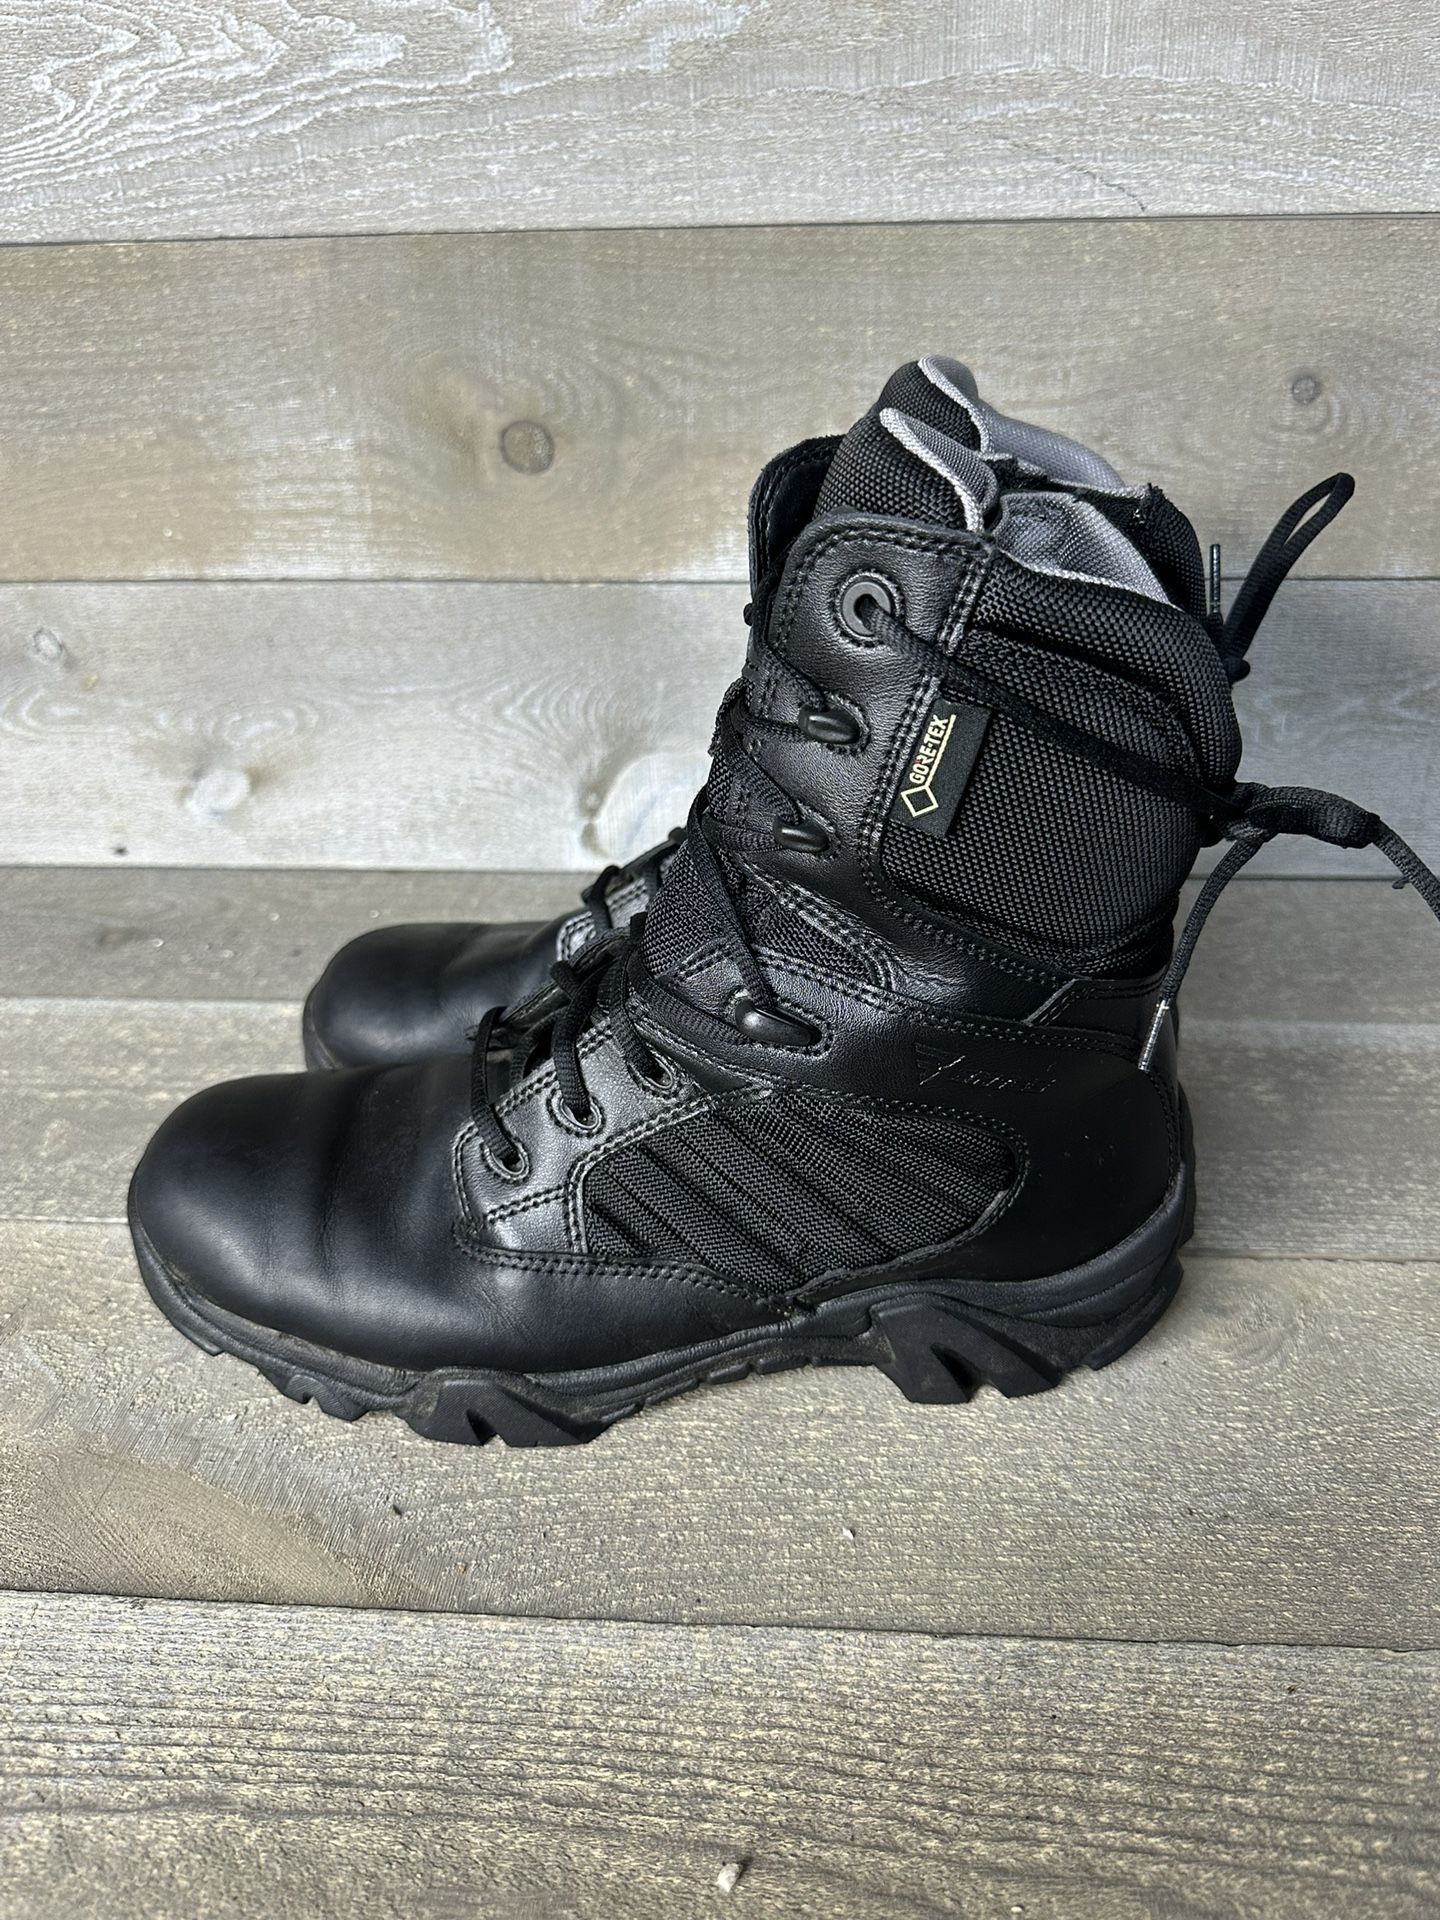 Bates GX 8 Gore Tex Side Zip E02268 Mens Size 10.5 Black Leather Tactical Boots